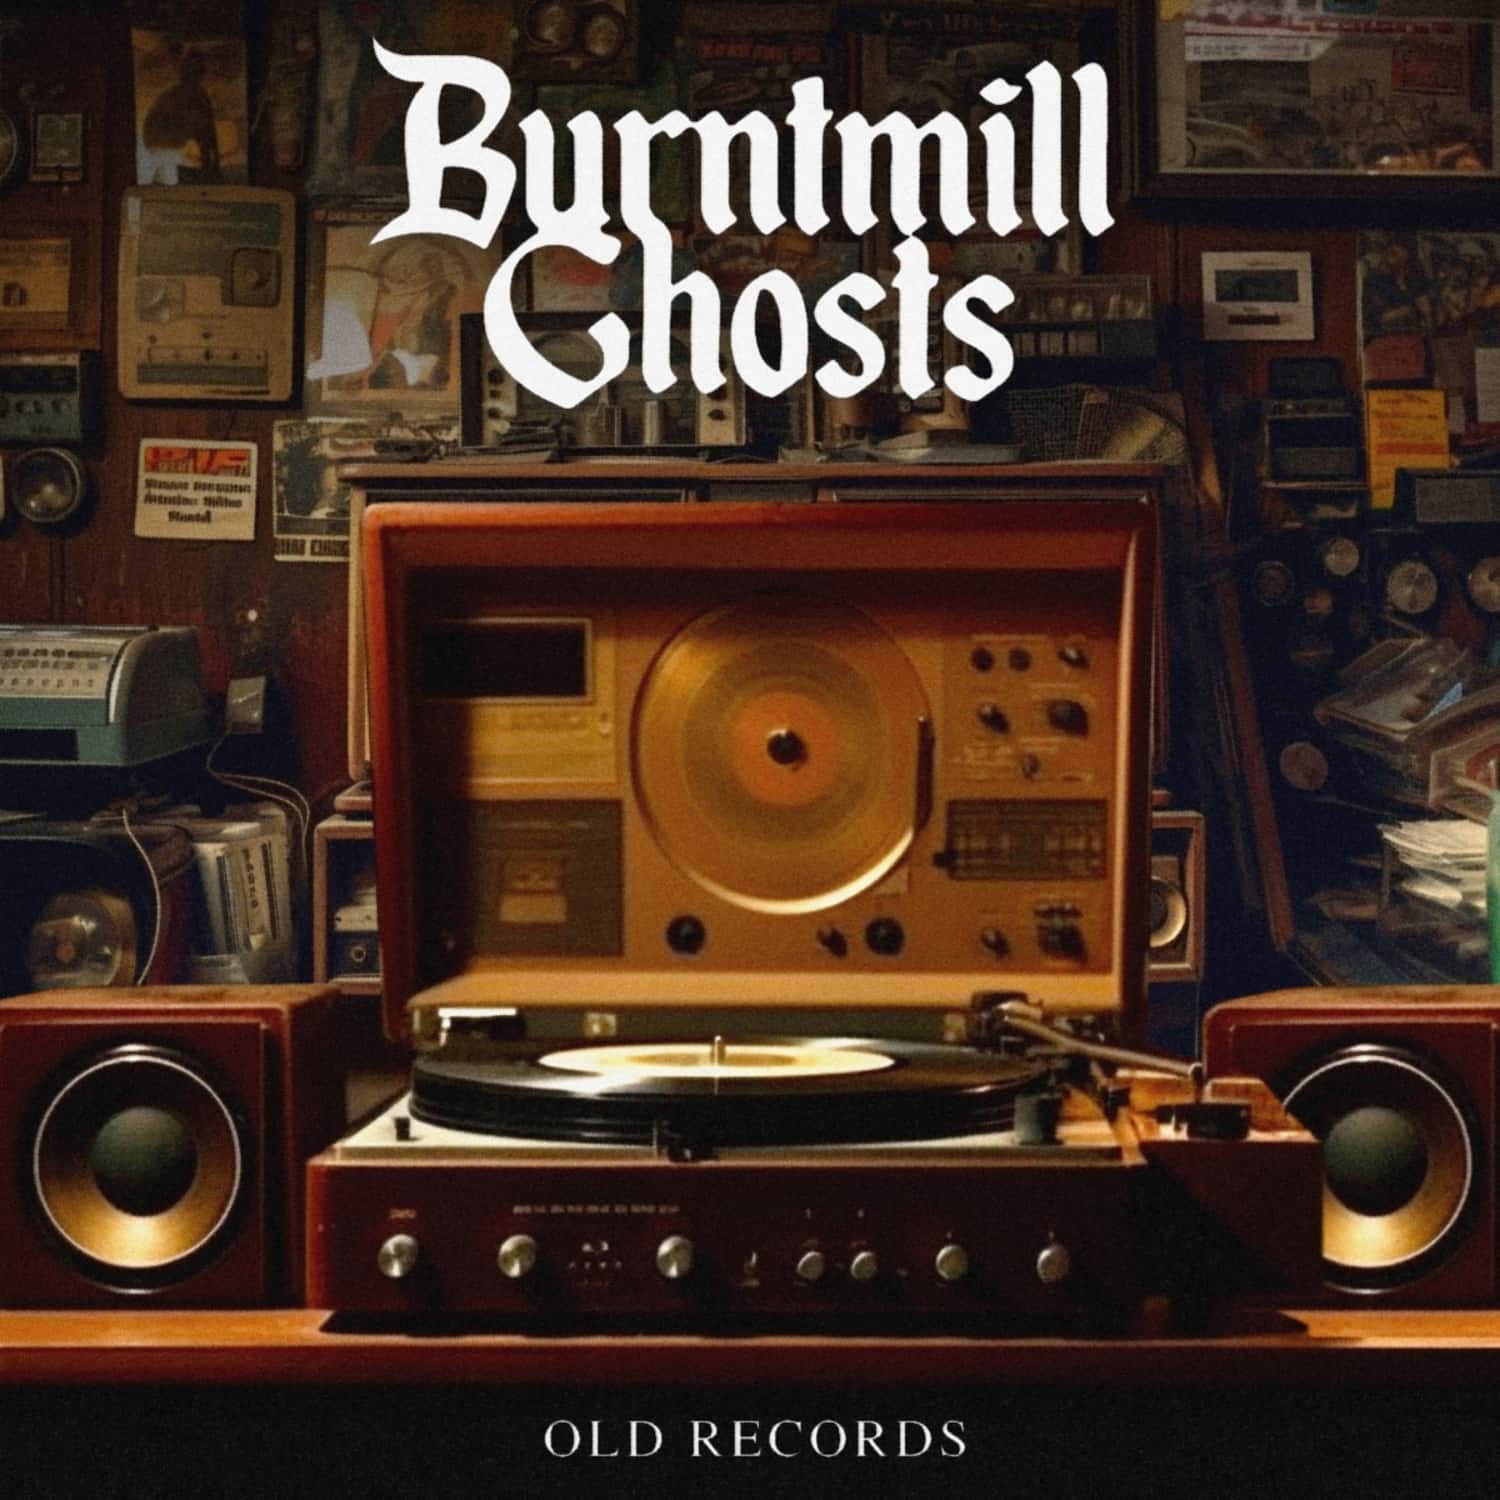 Burntmill Ghosts - OLD RECORDS 